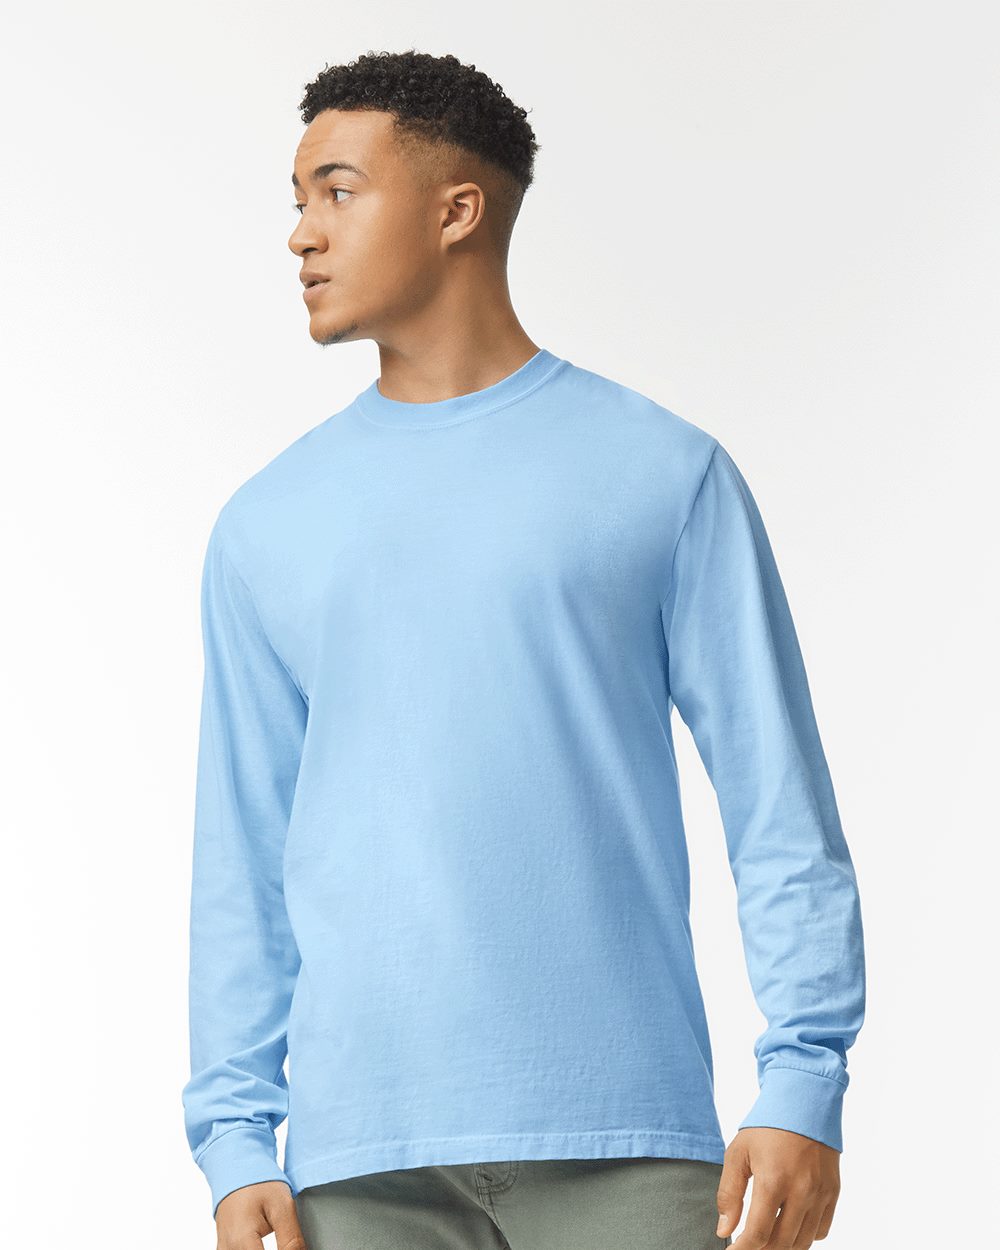 Comfort Colors Garment-Dyed Heavyweight Long Sleeve T-Shirt 6014 Comfort Colors Garment-Dyed Heavyweight Long Sleeve T-Shirt 6014